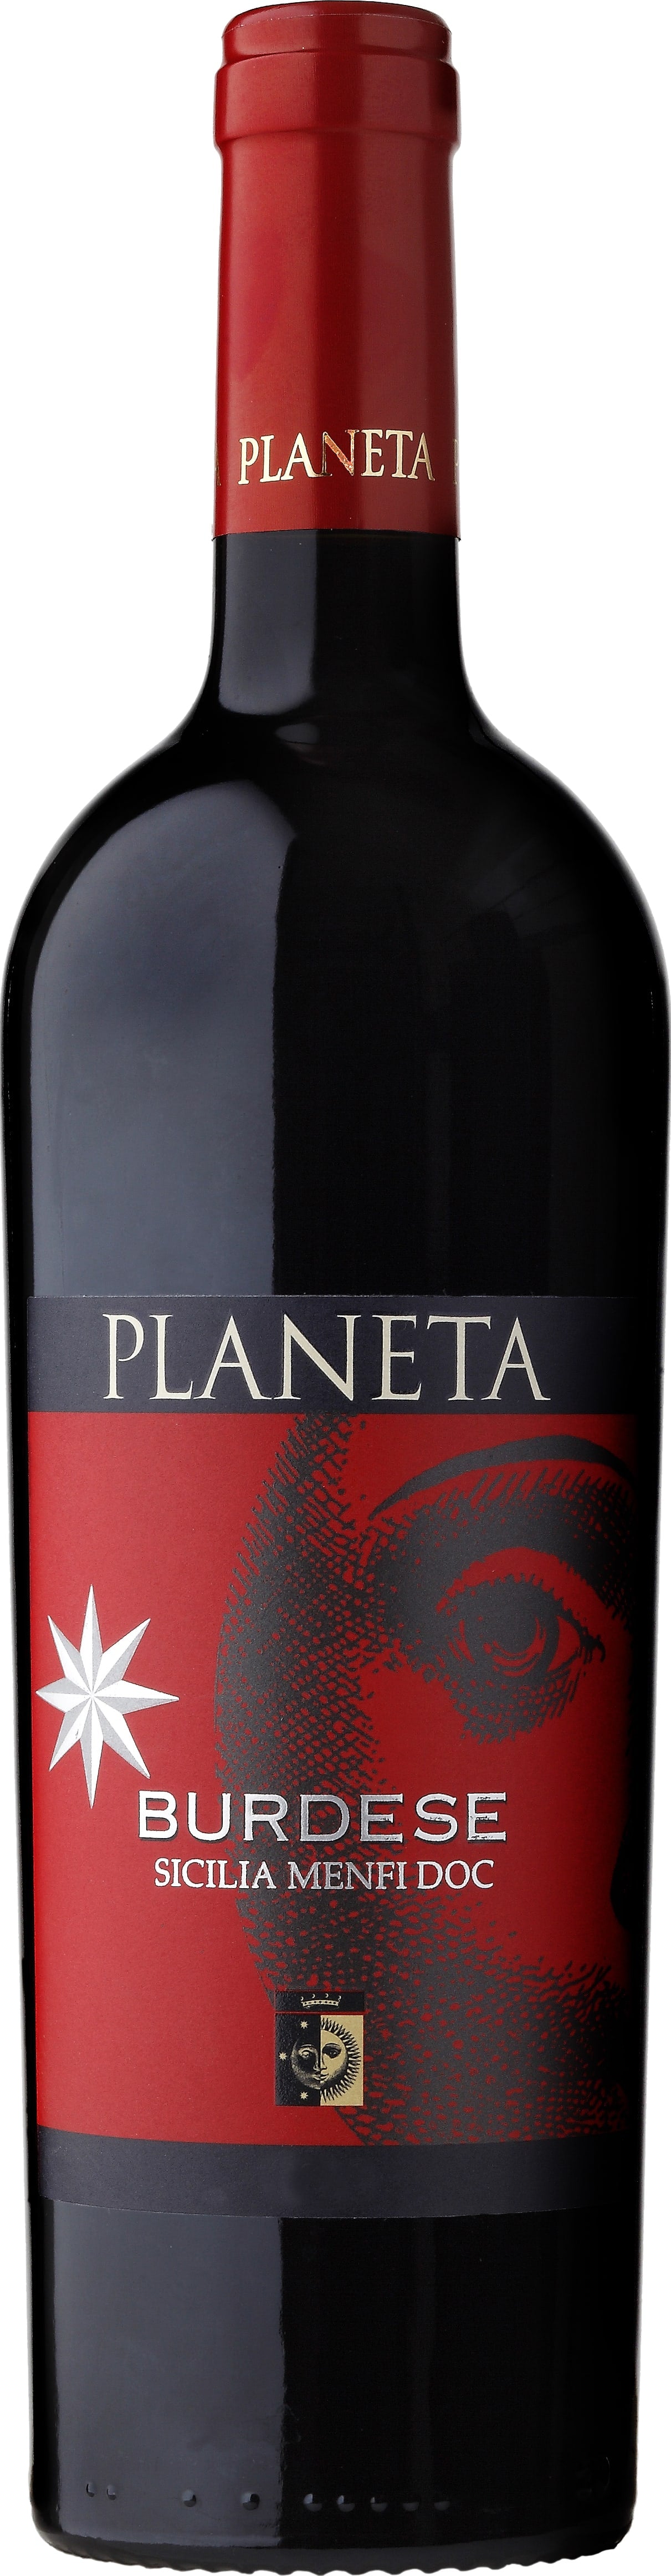 Planeta Burdese 2018 75cl - Buy Planeta Wines from GREAT WINES DIRECT wine shop